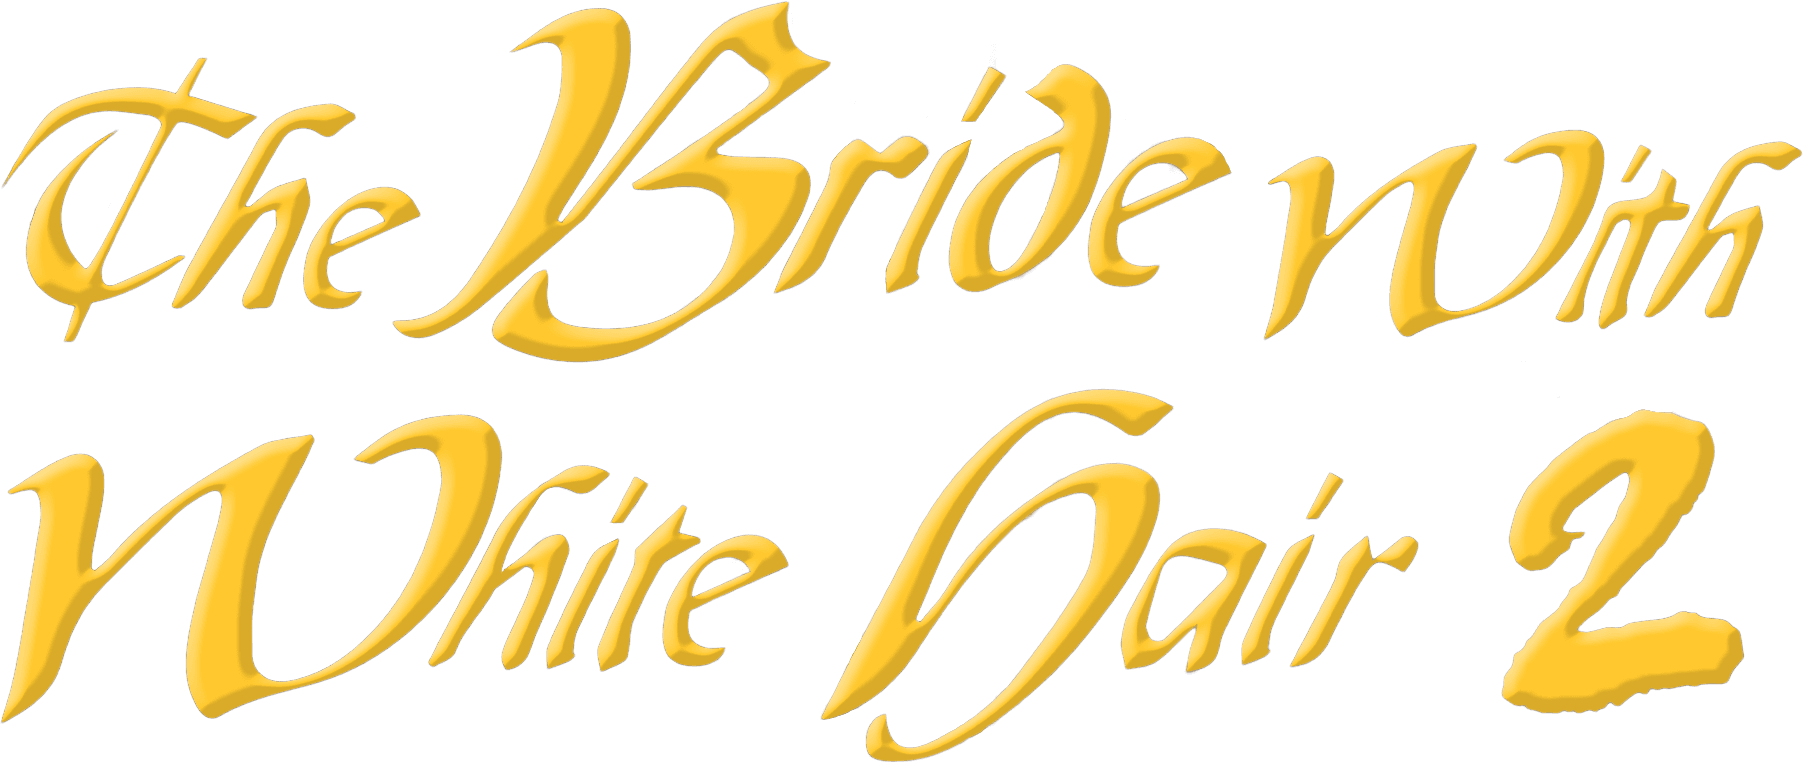 The Bride with White Hair 2 logo